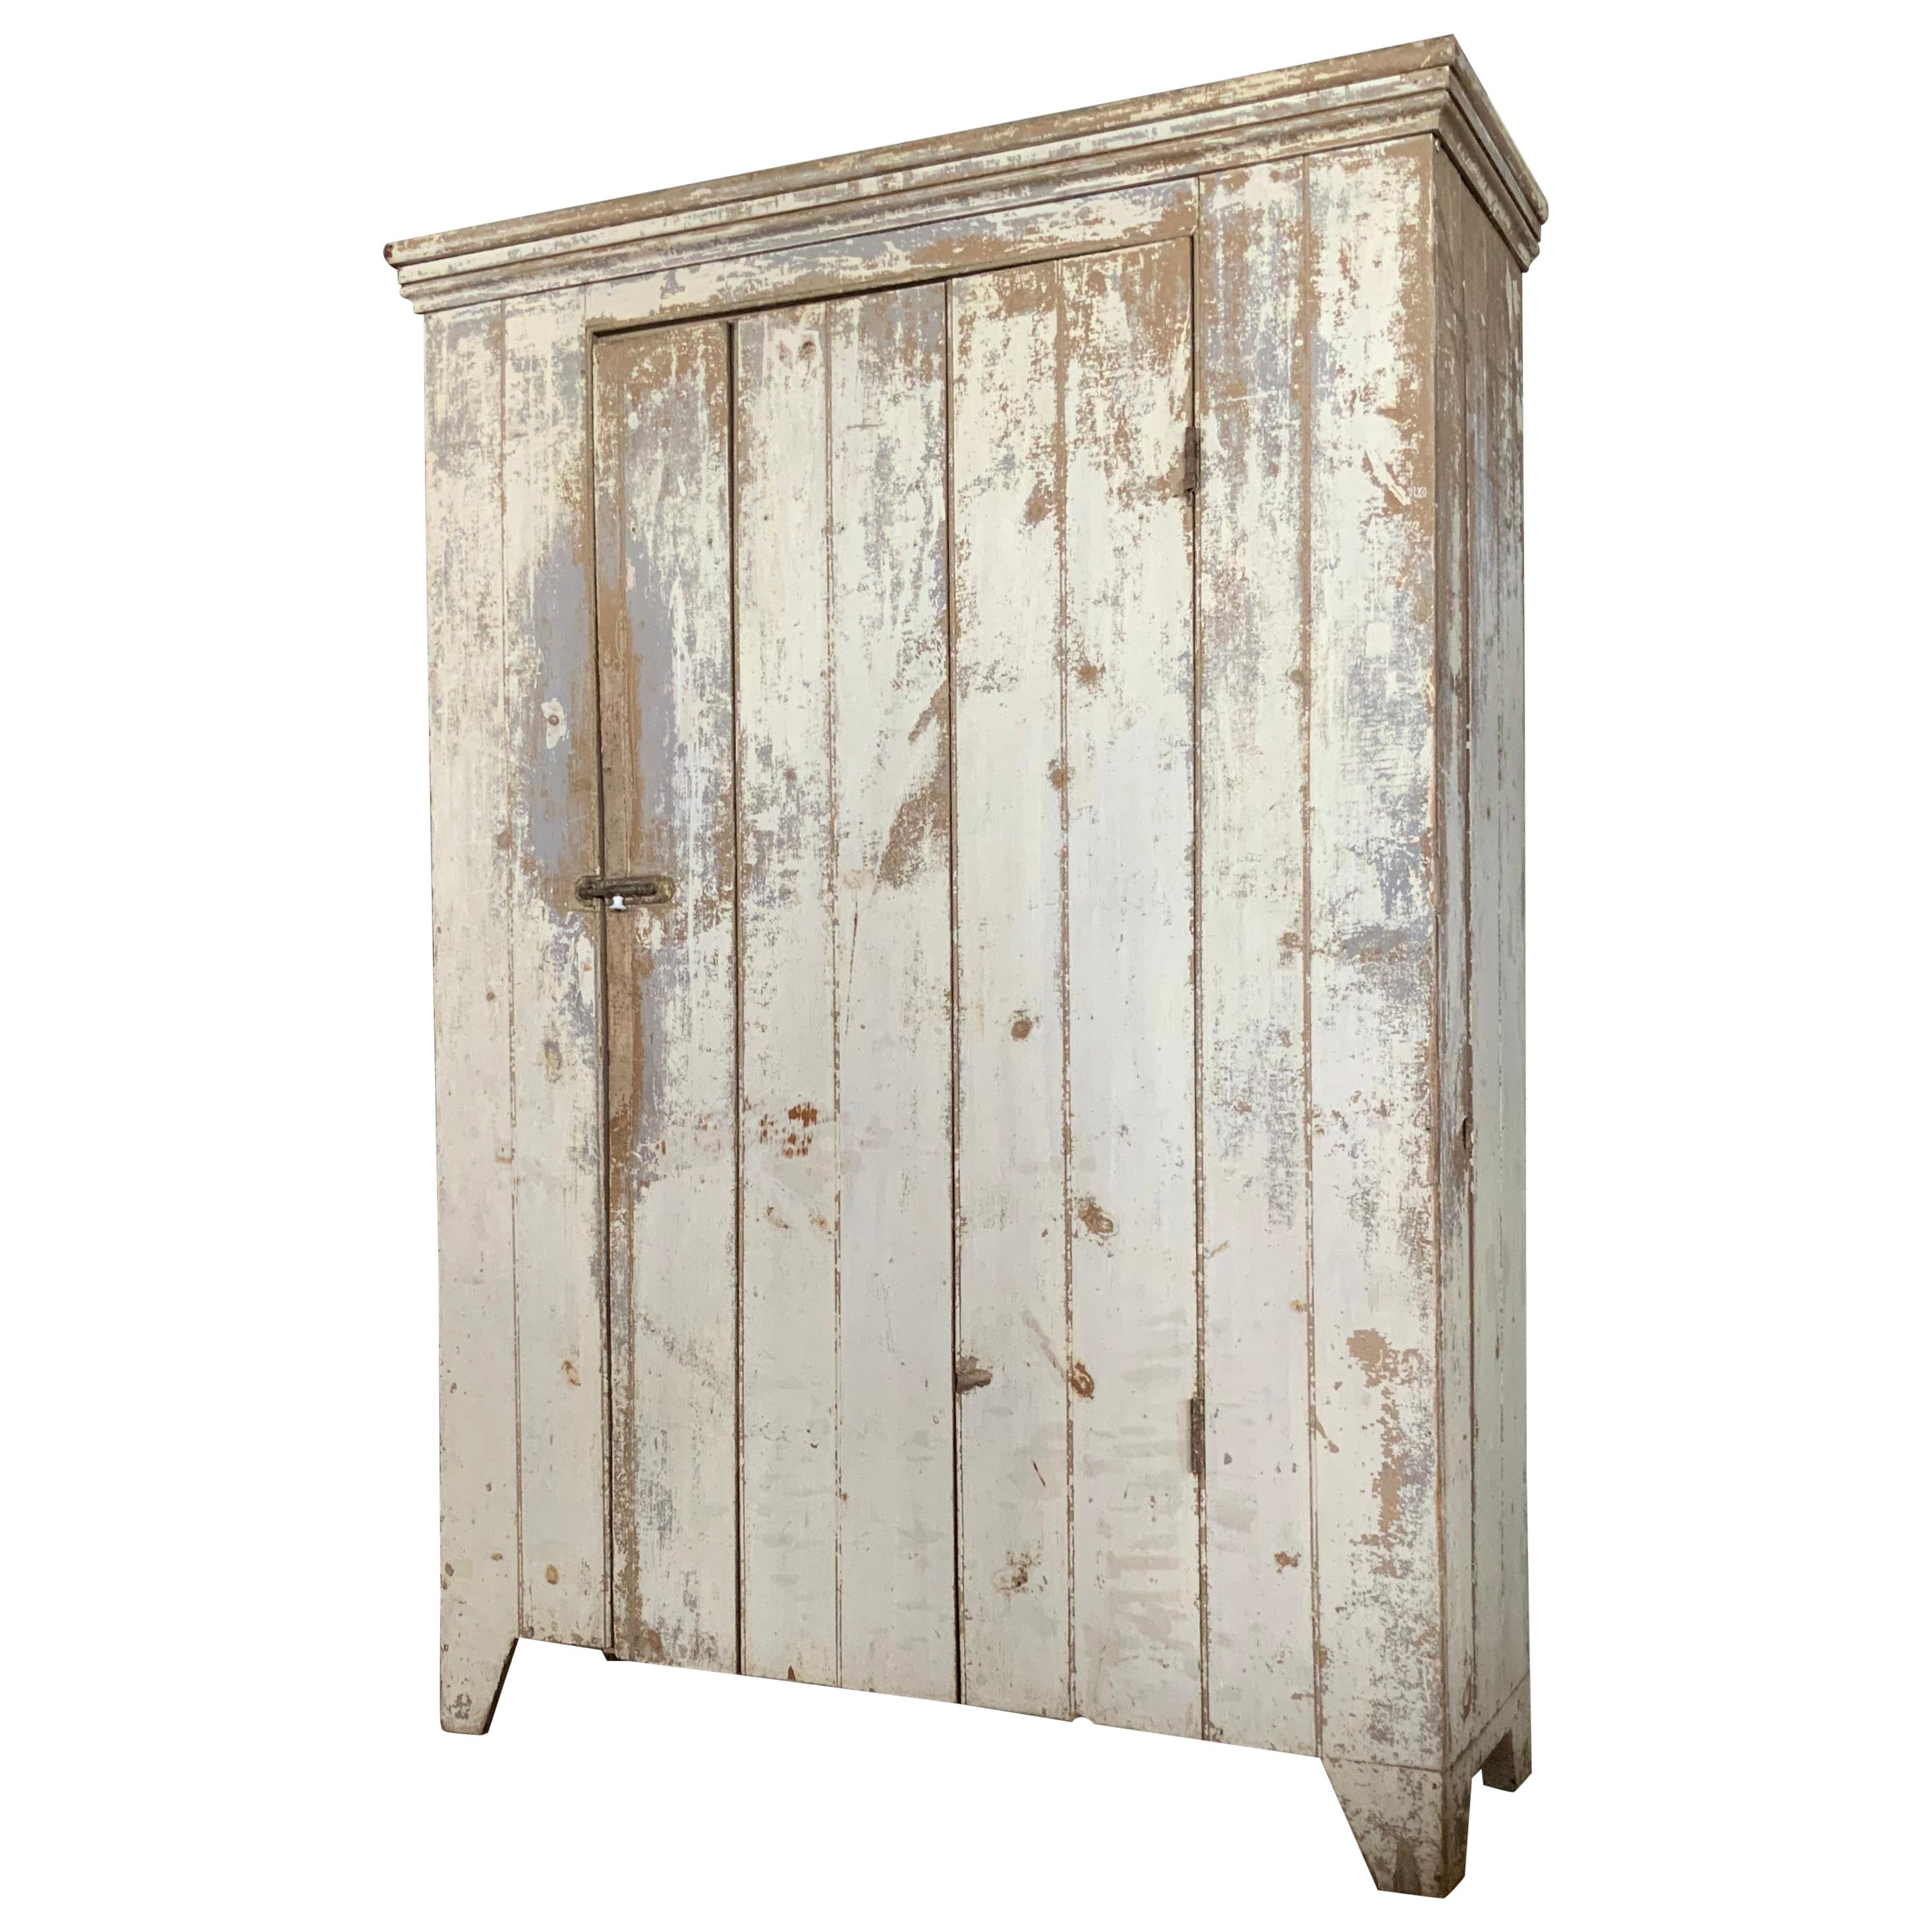 Antique 19th Century Painted Country Cupboard